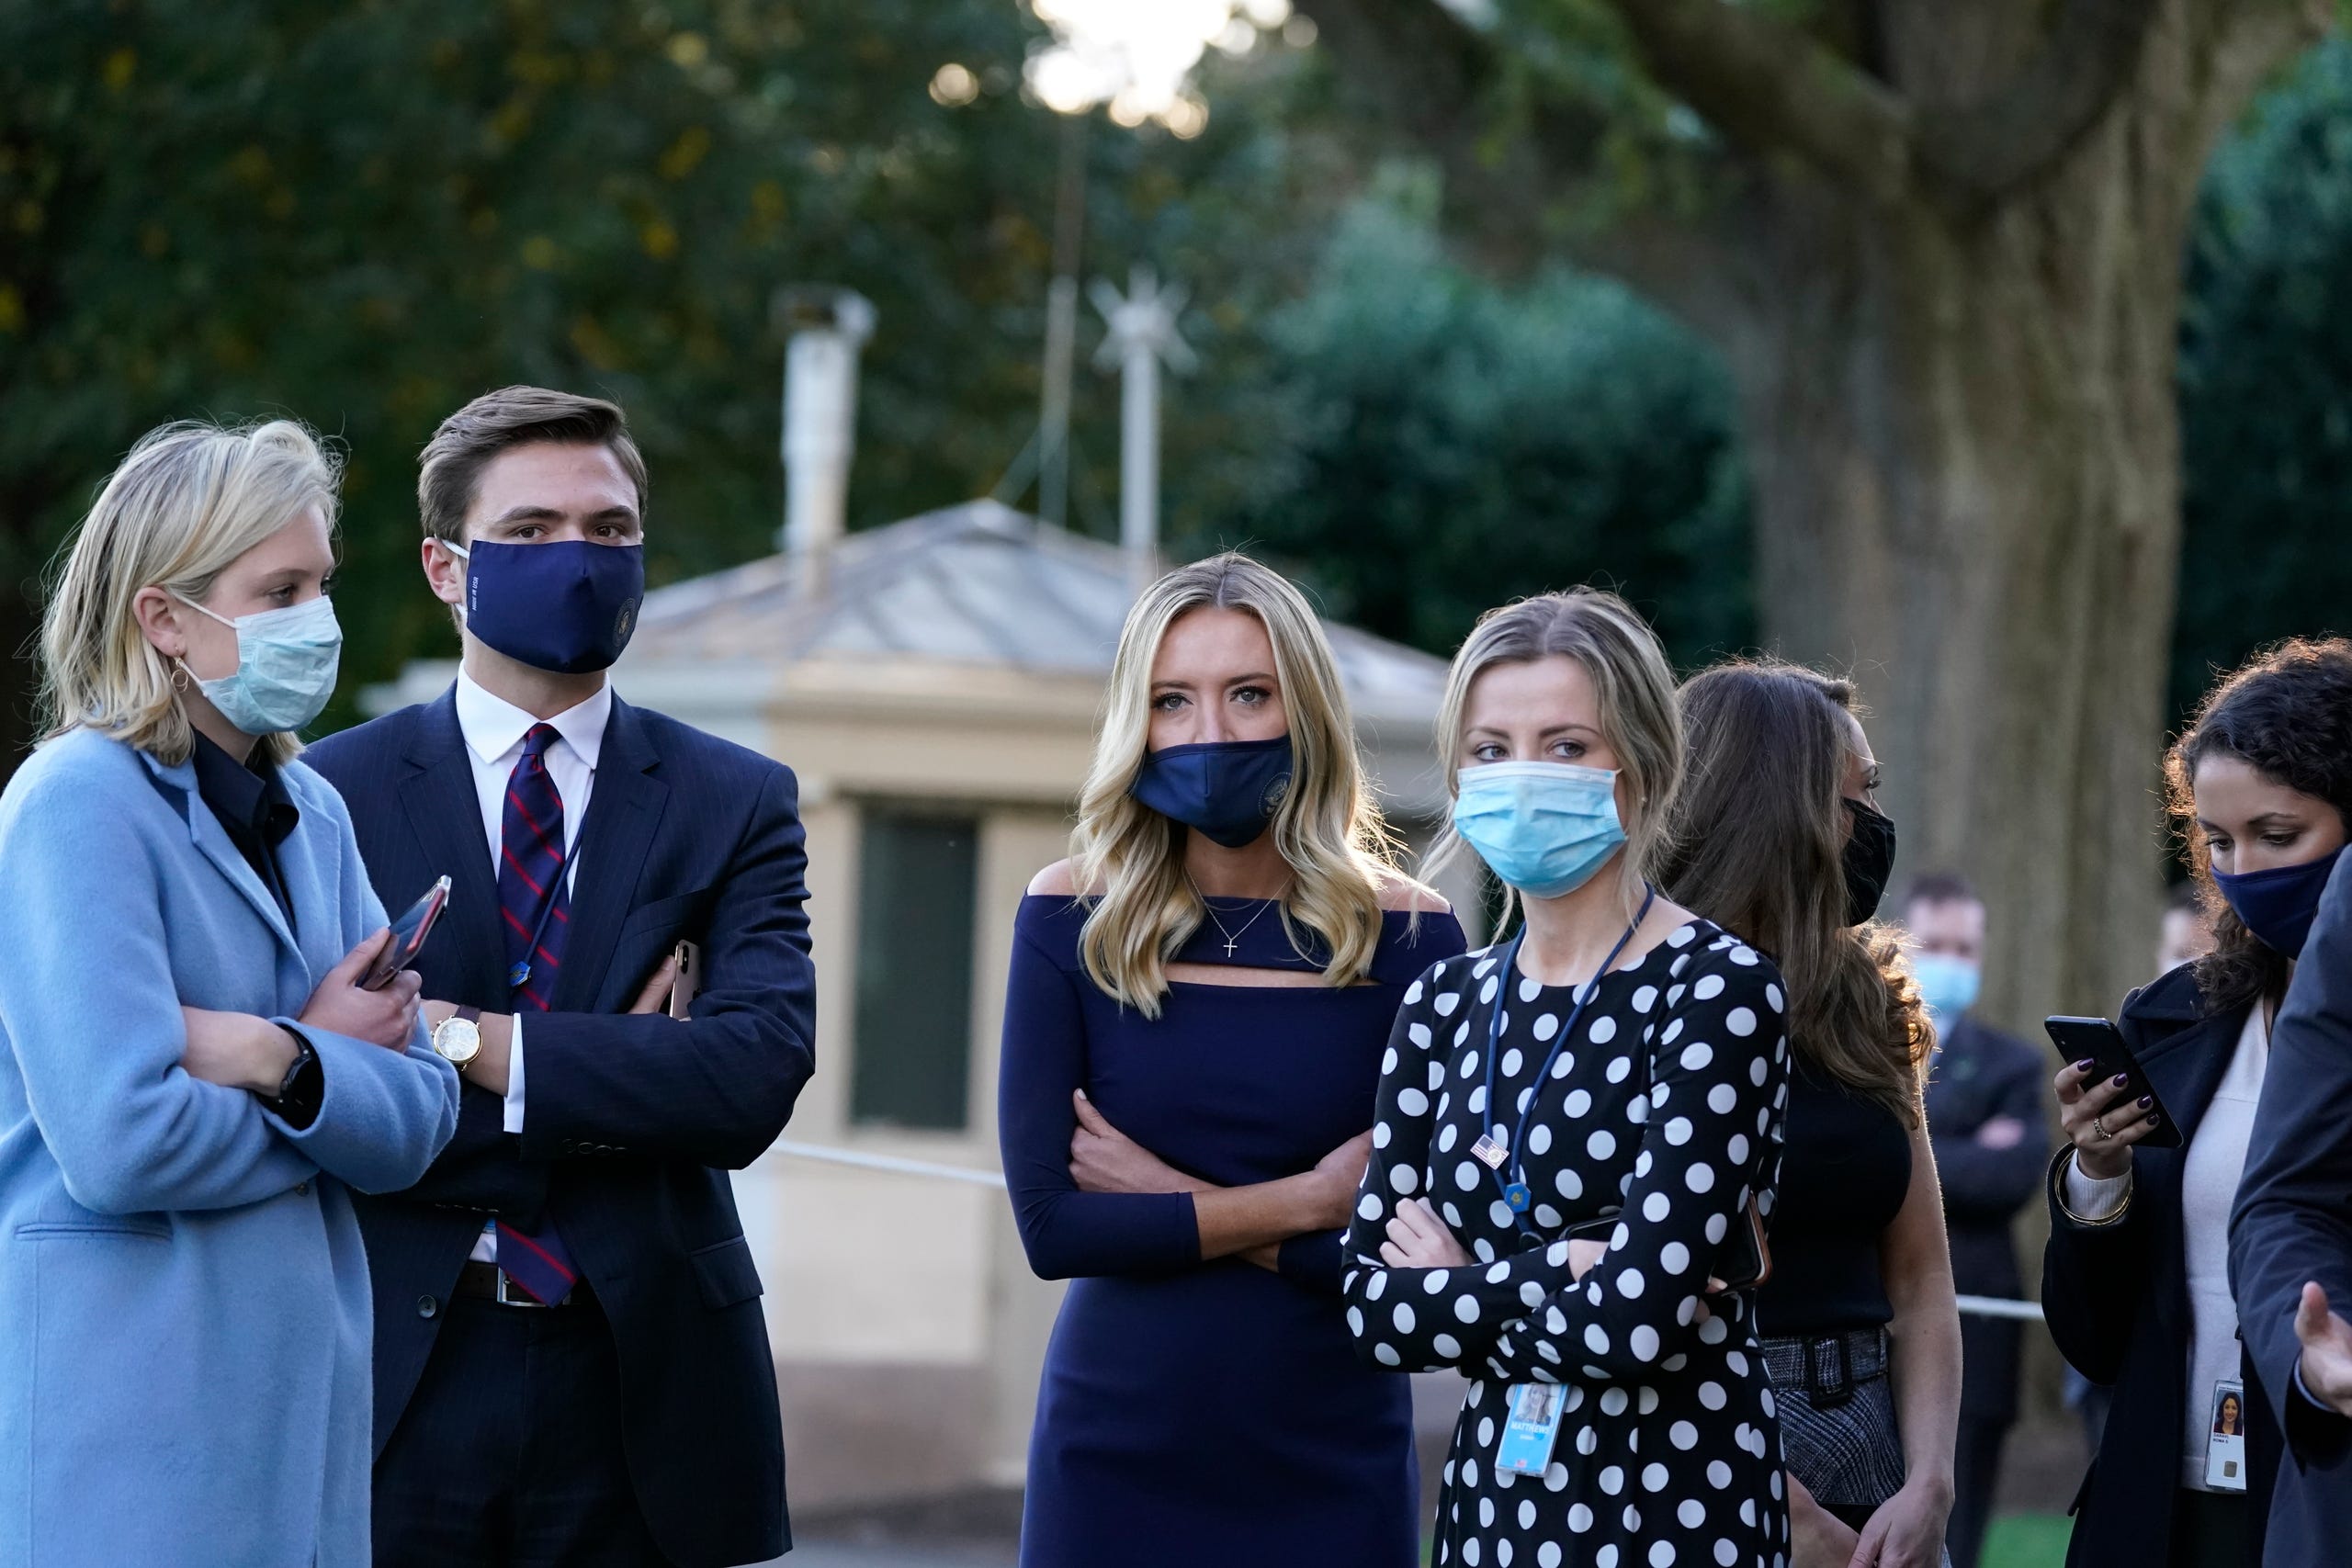 Chatting the Pictures: White House Swagger Vaporized as Soon as Trump Got Sick